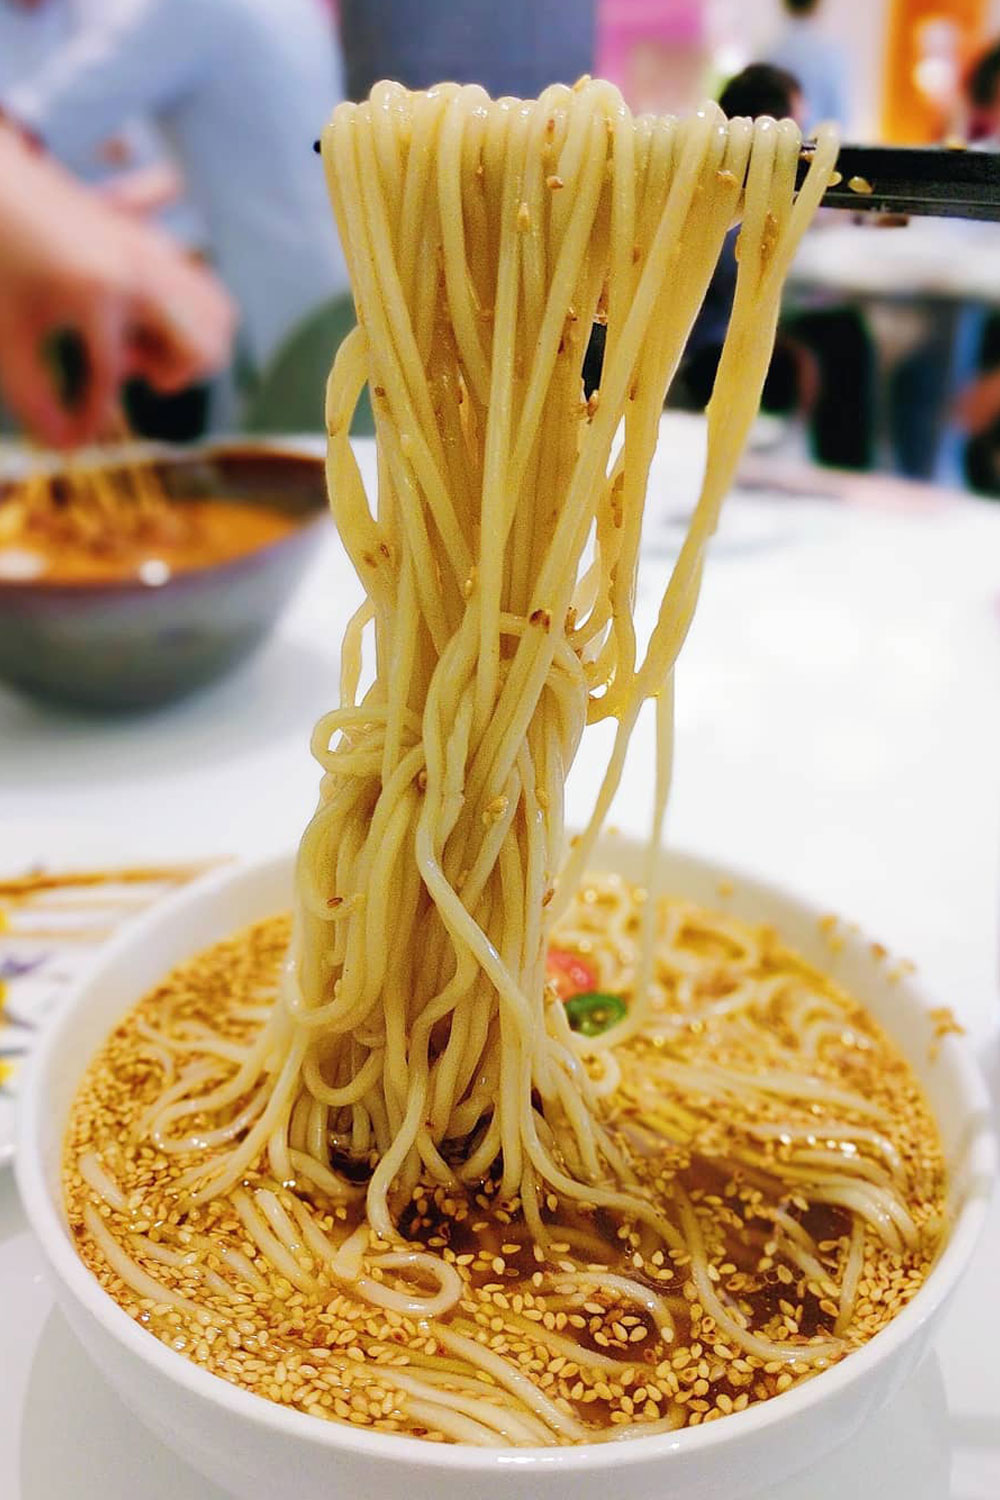 A noodle soup dish with noodles hanging from chopsticks.